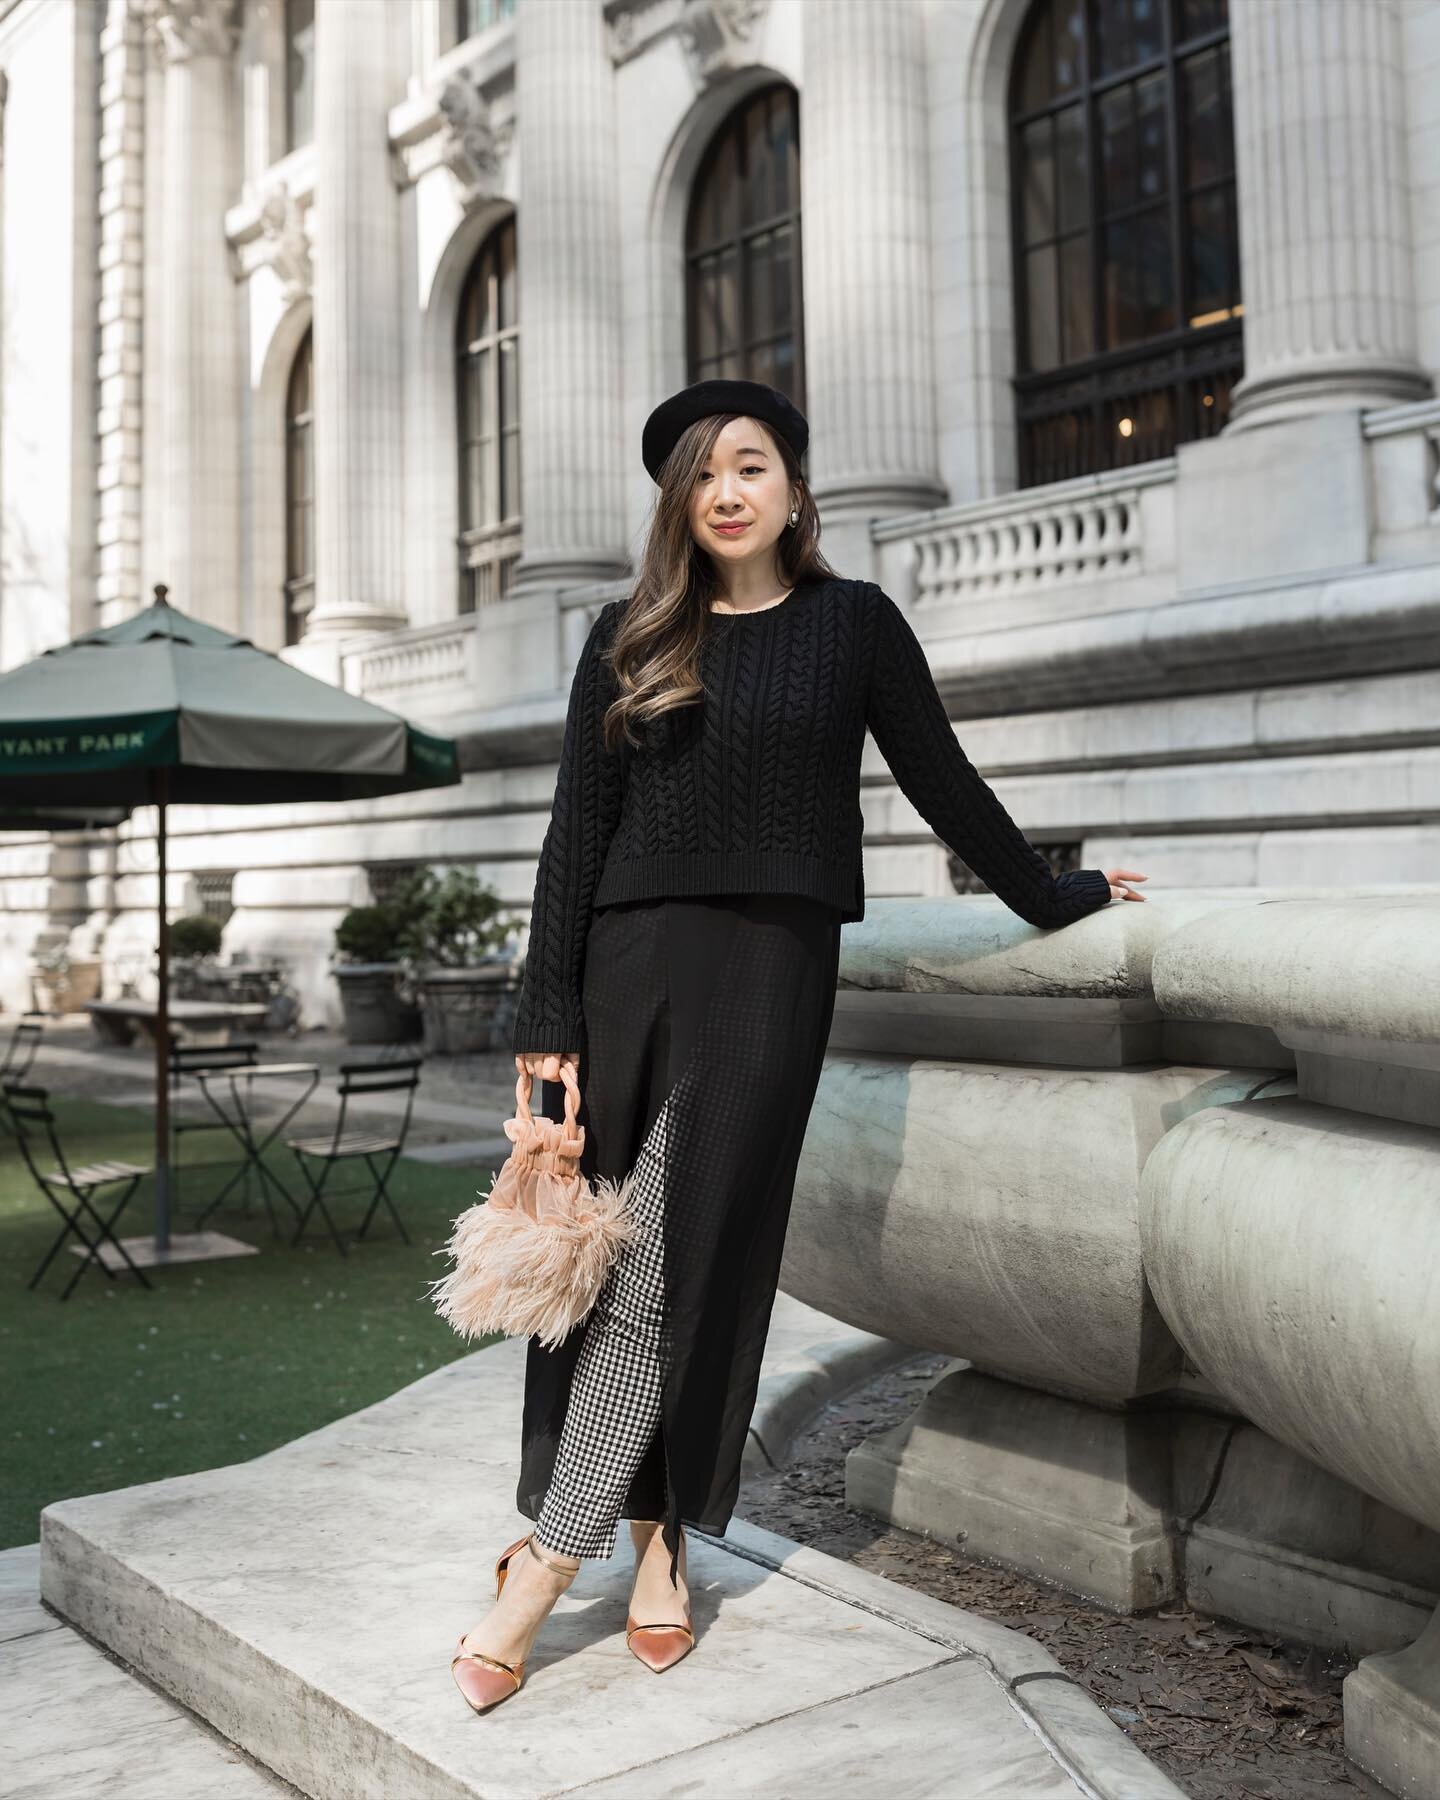 I&rsquo;m wearing Dior? 😳

How? 🧐 Well, it&rsquo;s only because @wear.wardrobe made it possible &mdash; I was able to rent this Christian Dior cable knit sweater sheer dress from for less than $30 for 4 days and it originally retails for $1,250!

R